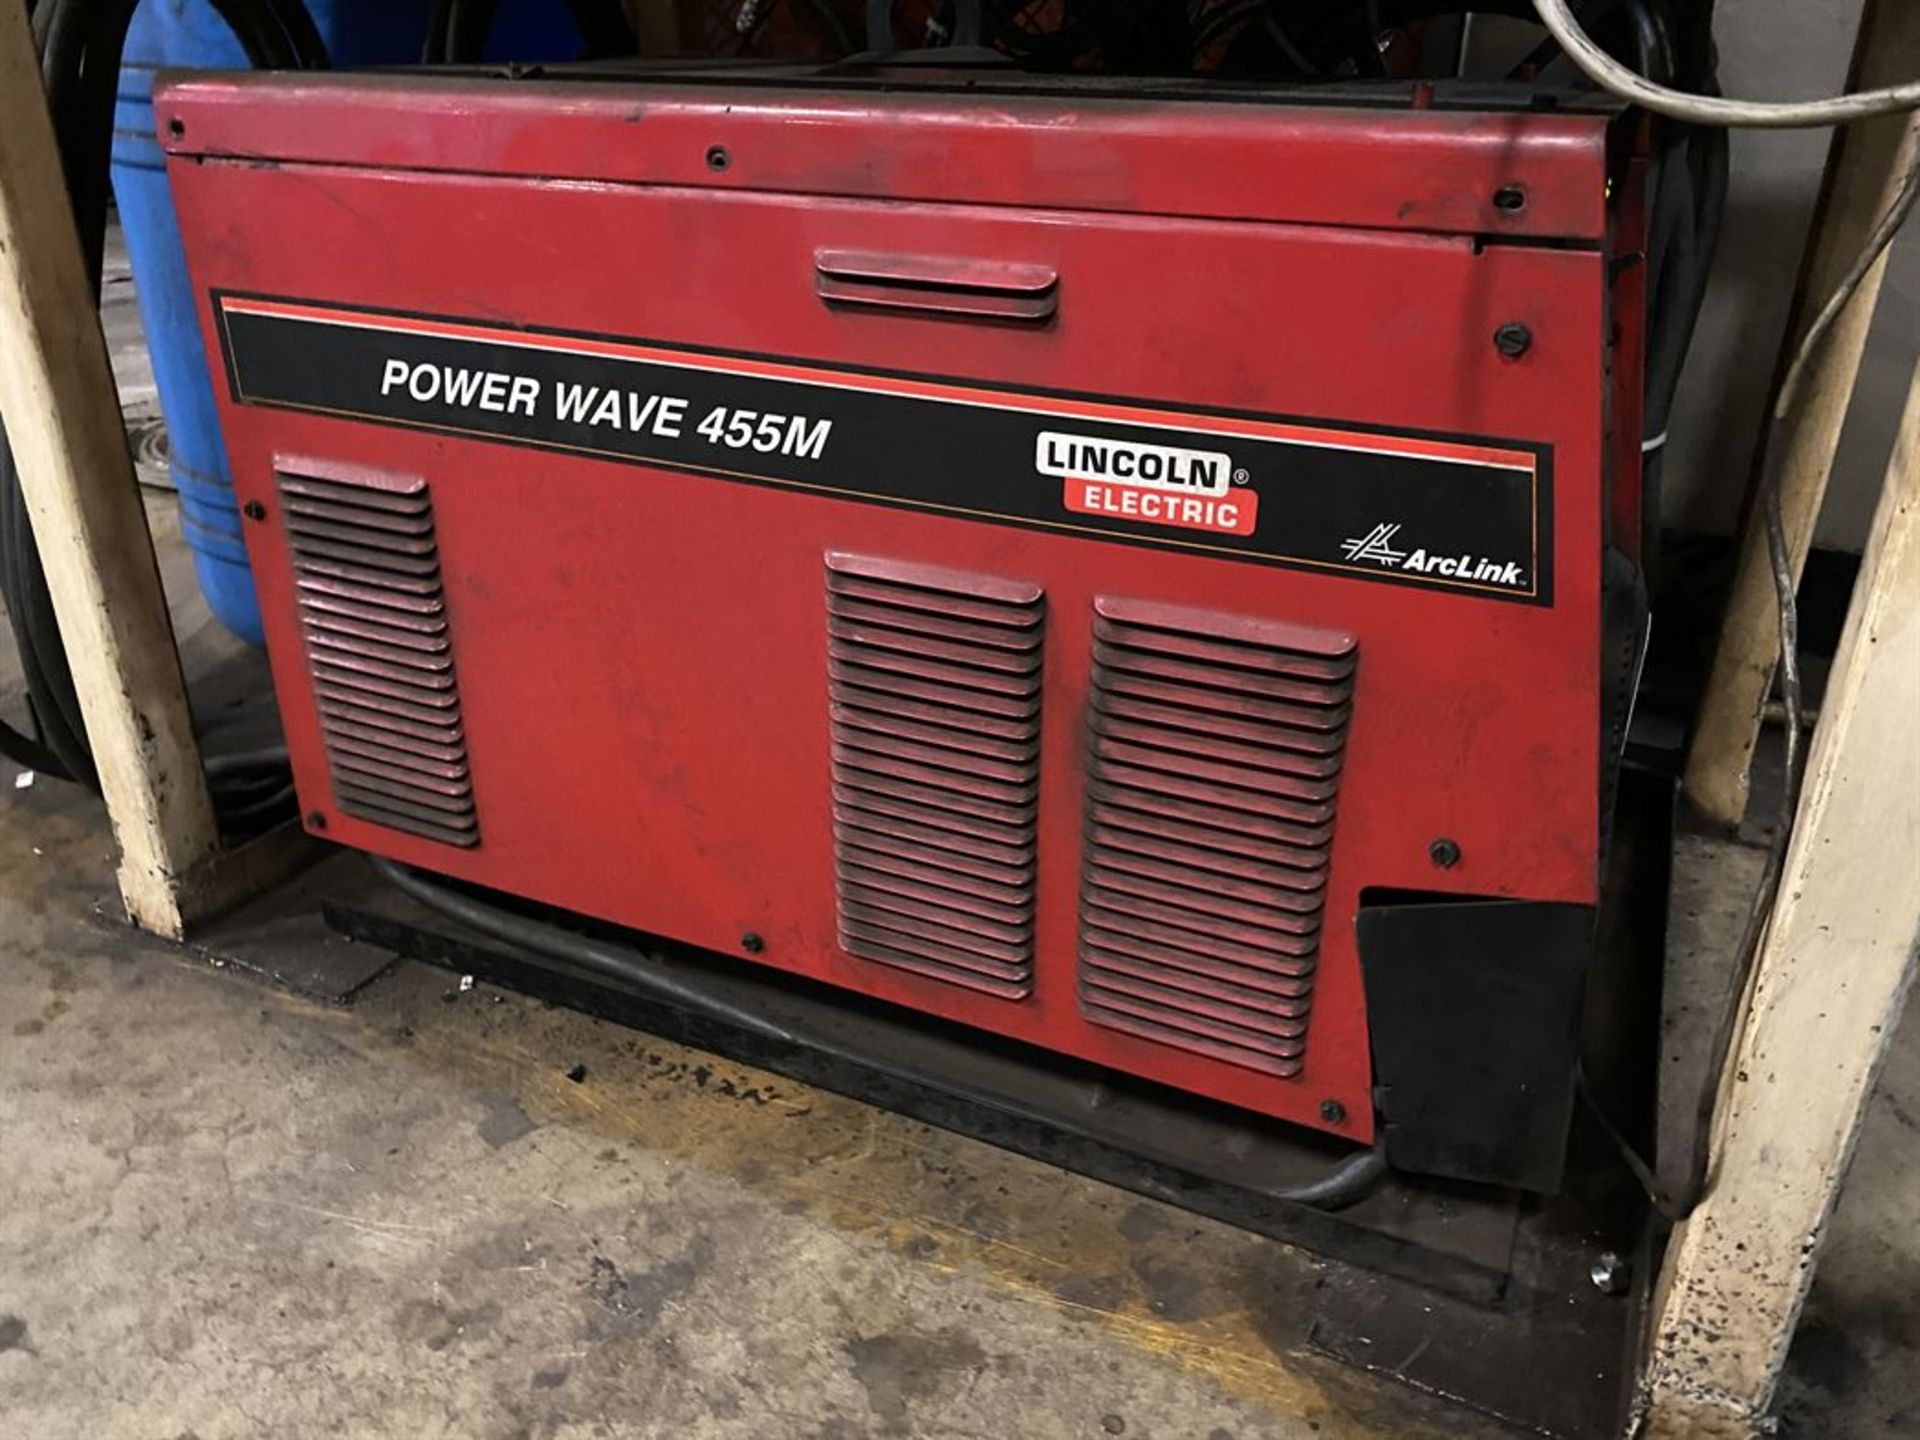 Lincoln Power Wave 455M Welding Power Source, s/n U1040622718 - Image 2 of 3